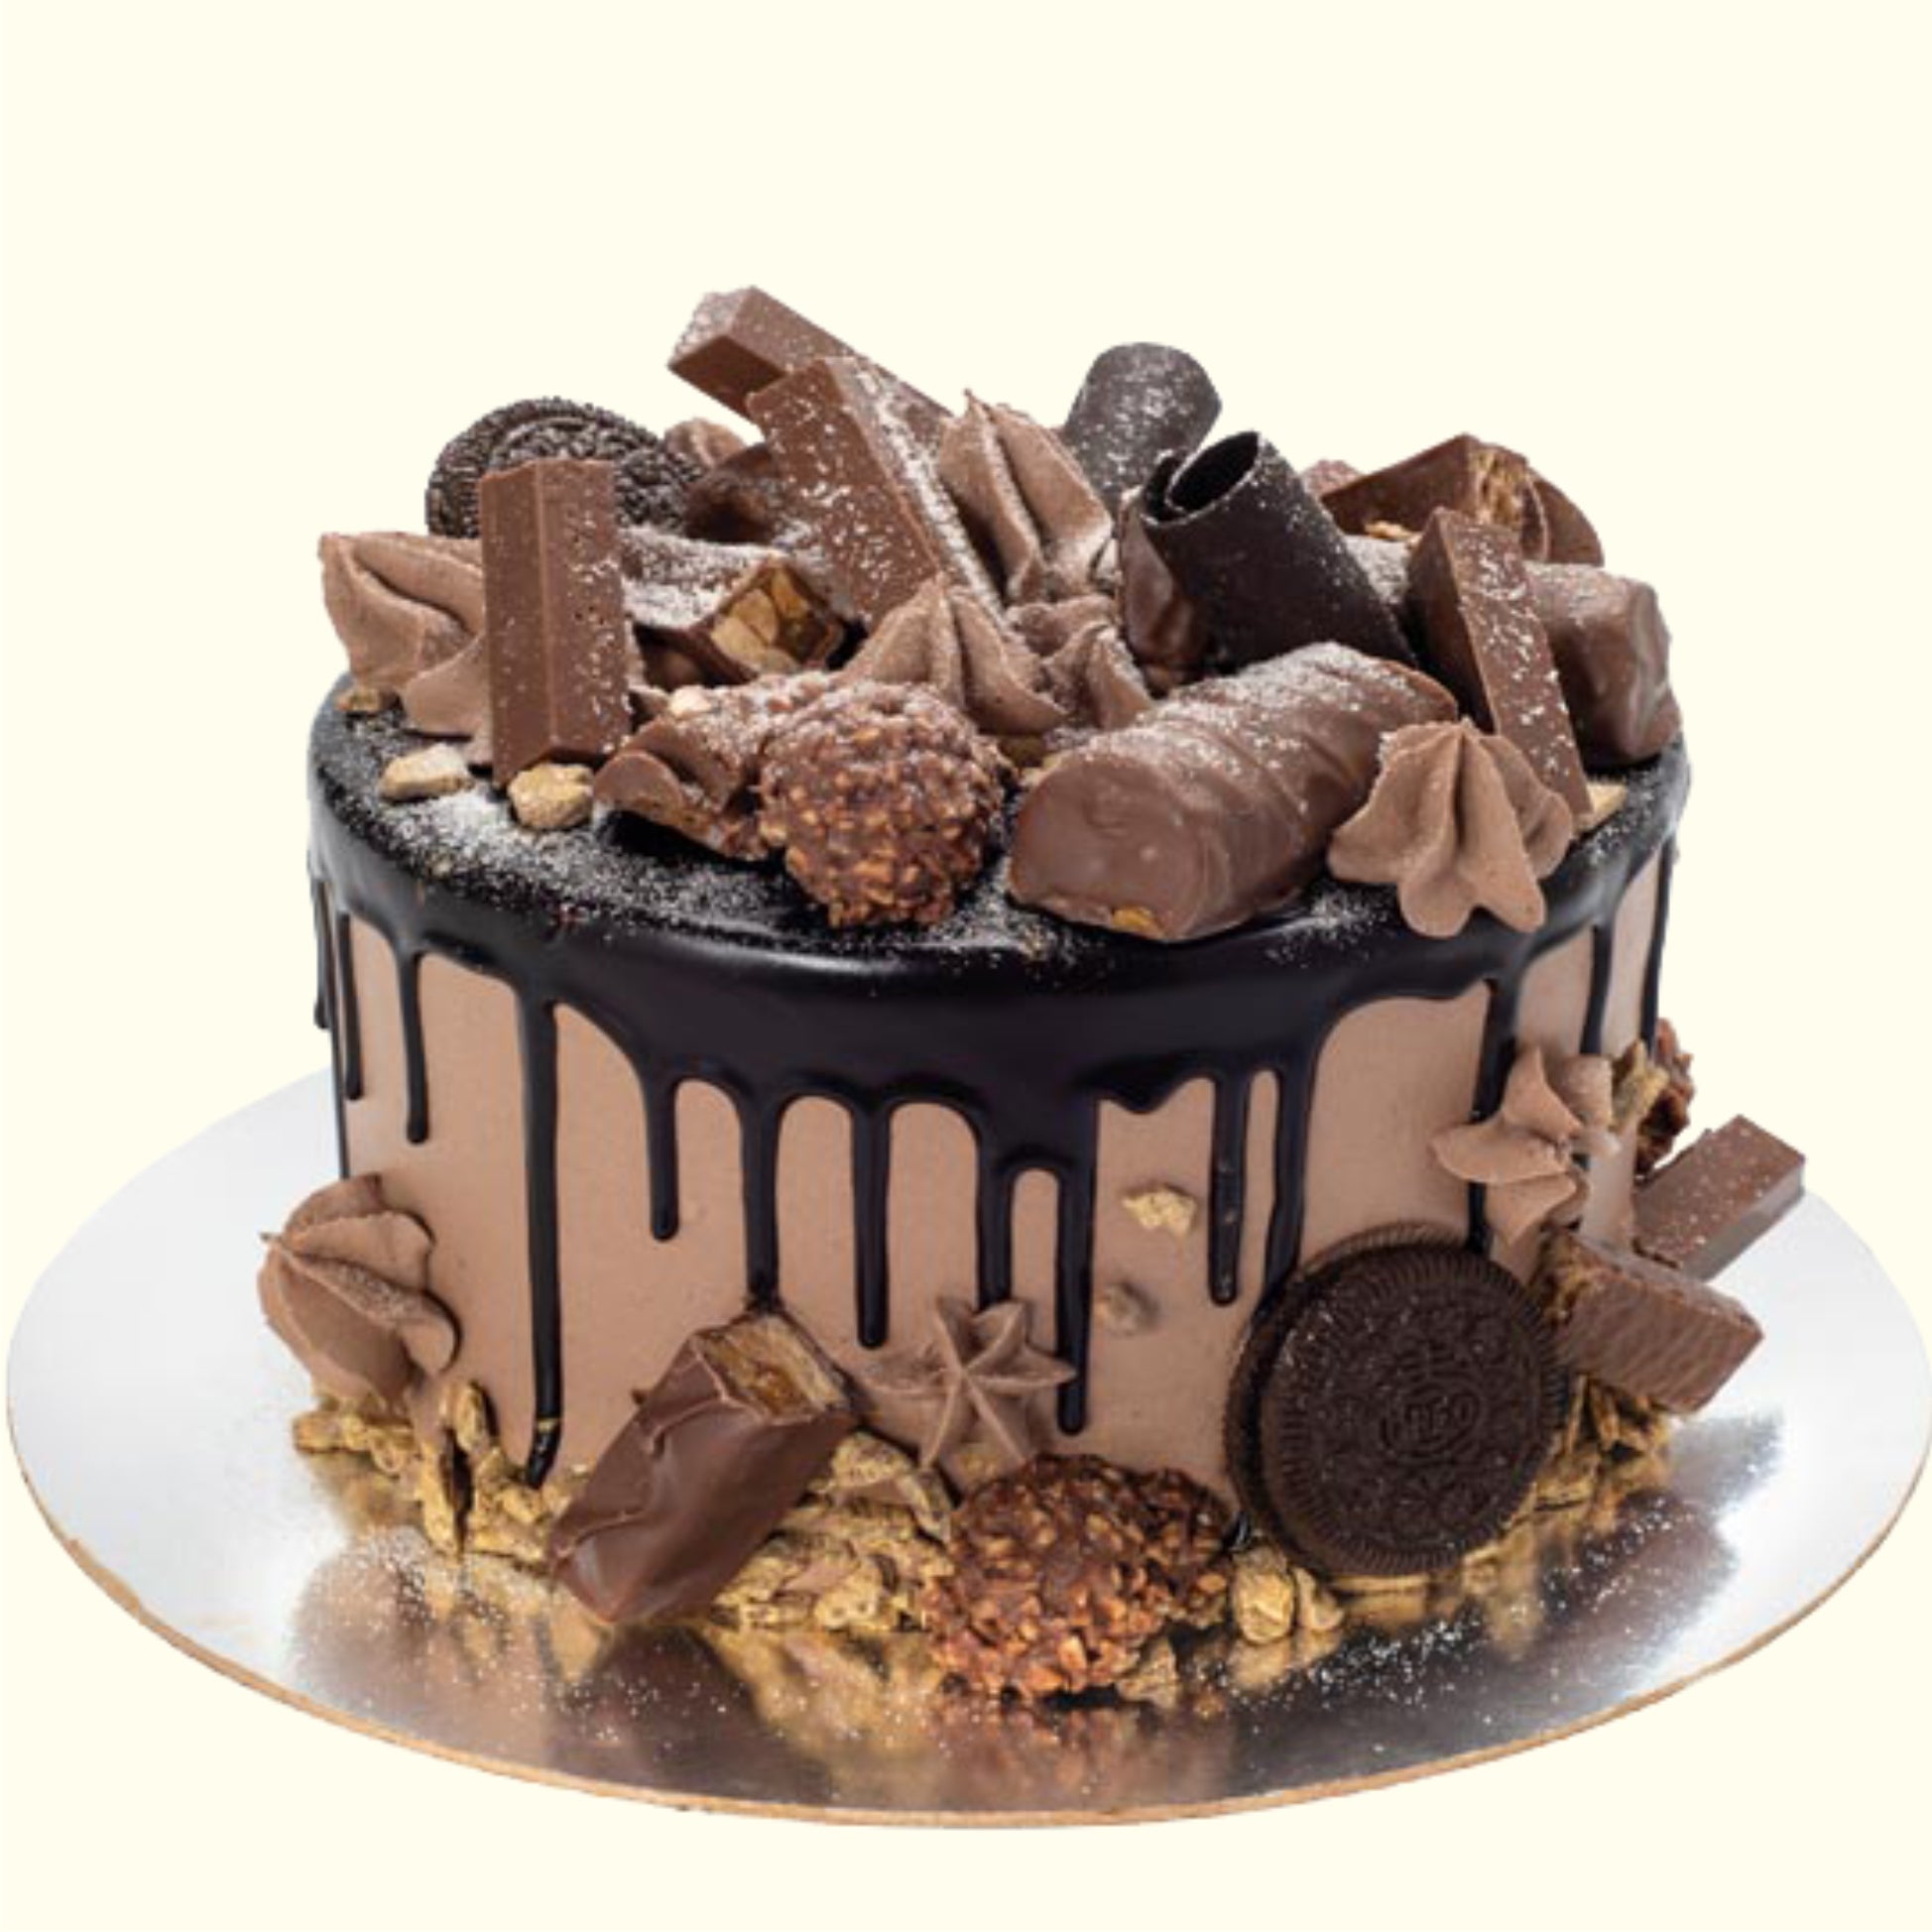 Birthday cake in Moga - Cake-20 Welcome Bekary Free home delivery in Moga Rs =500/lbs book now !! call @ 7888921454 | Facebook